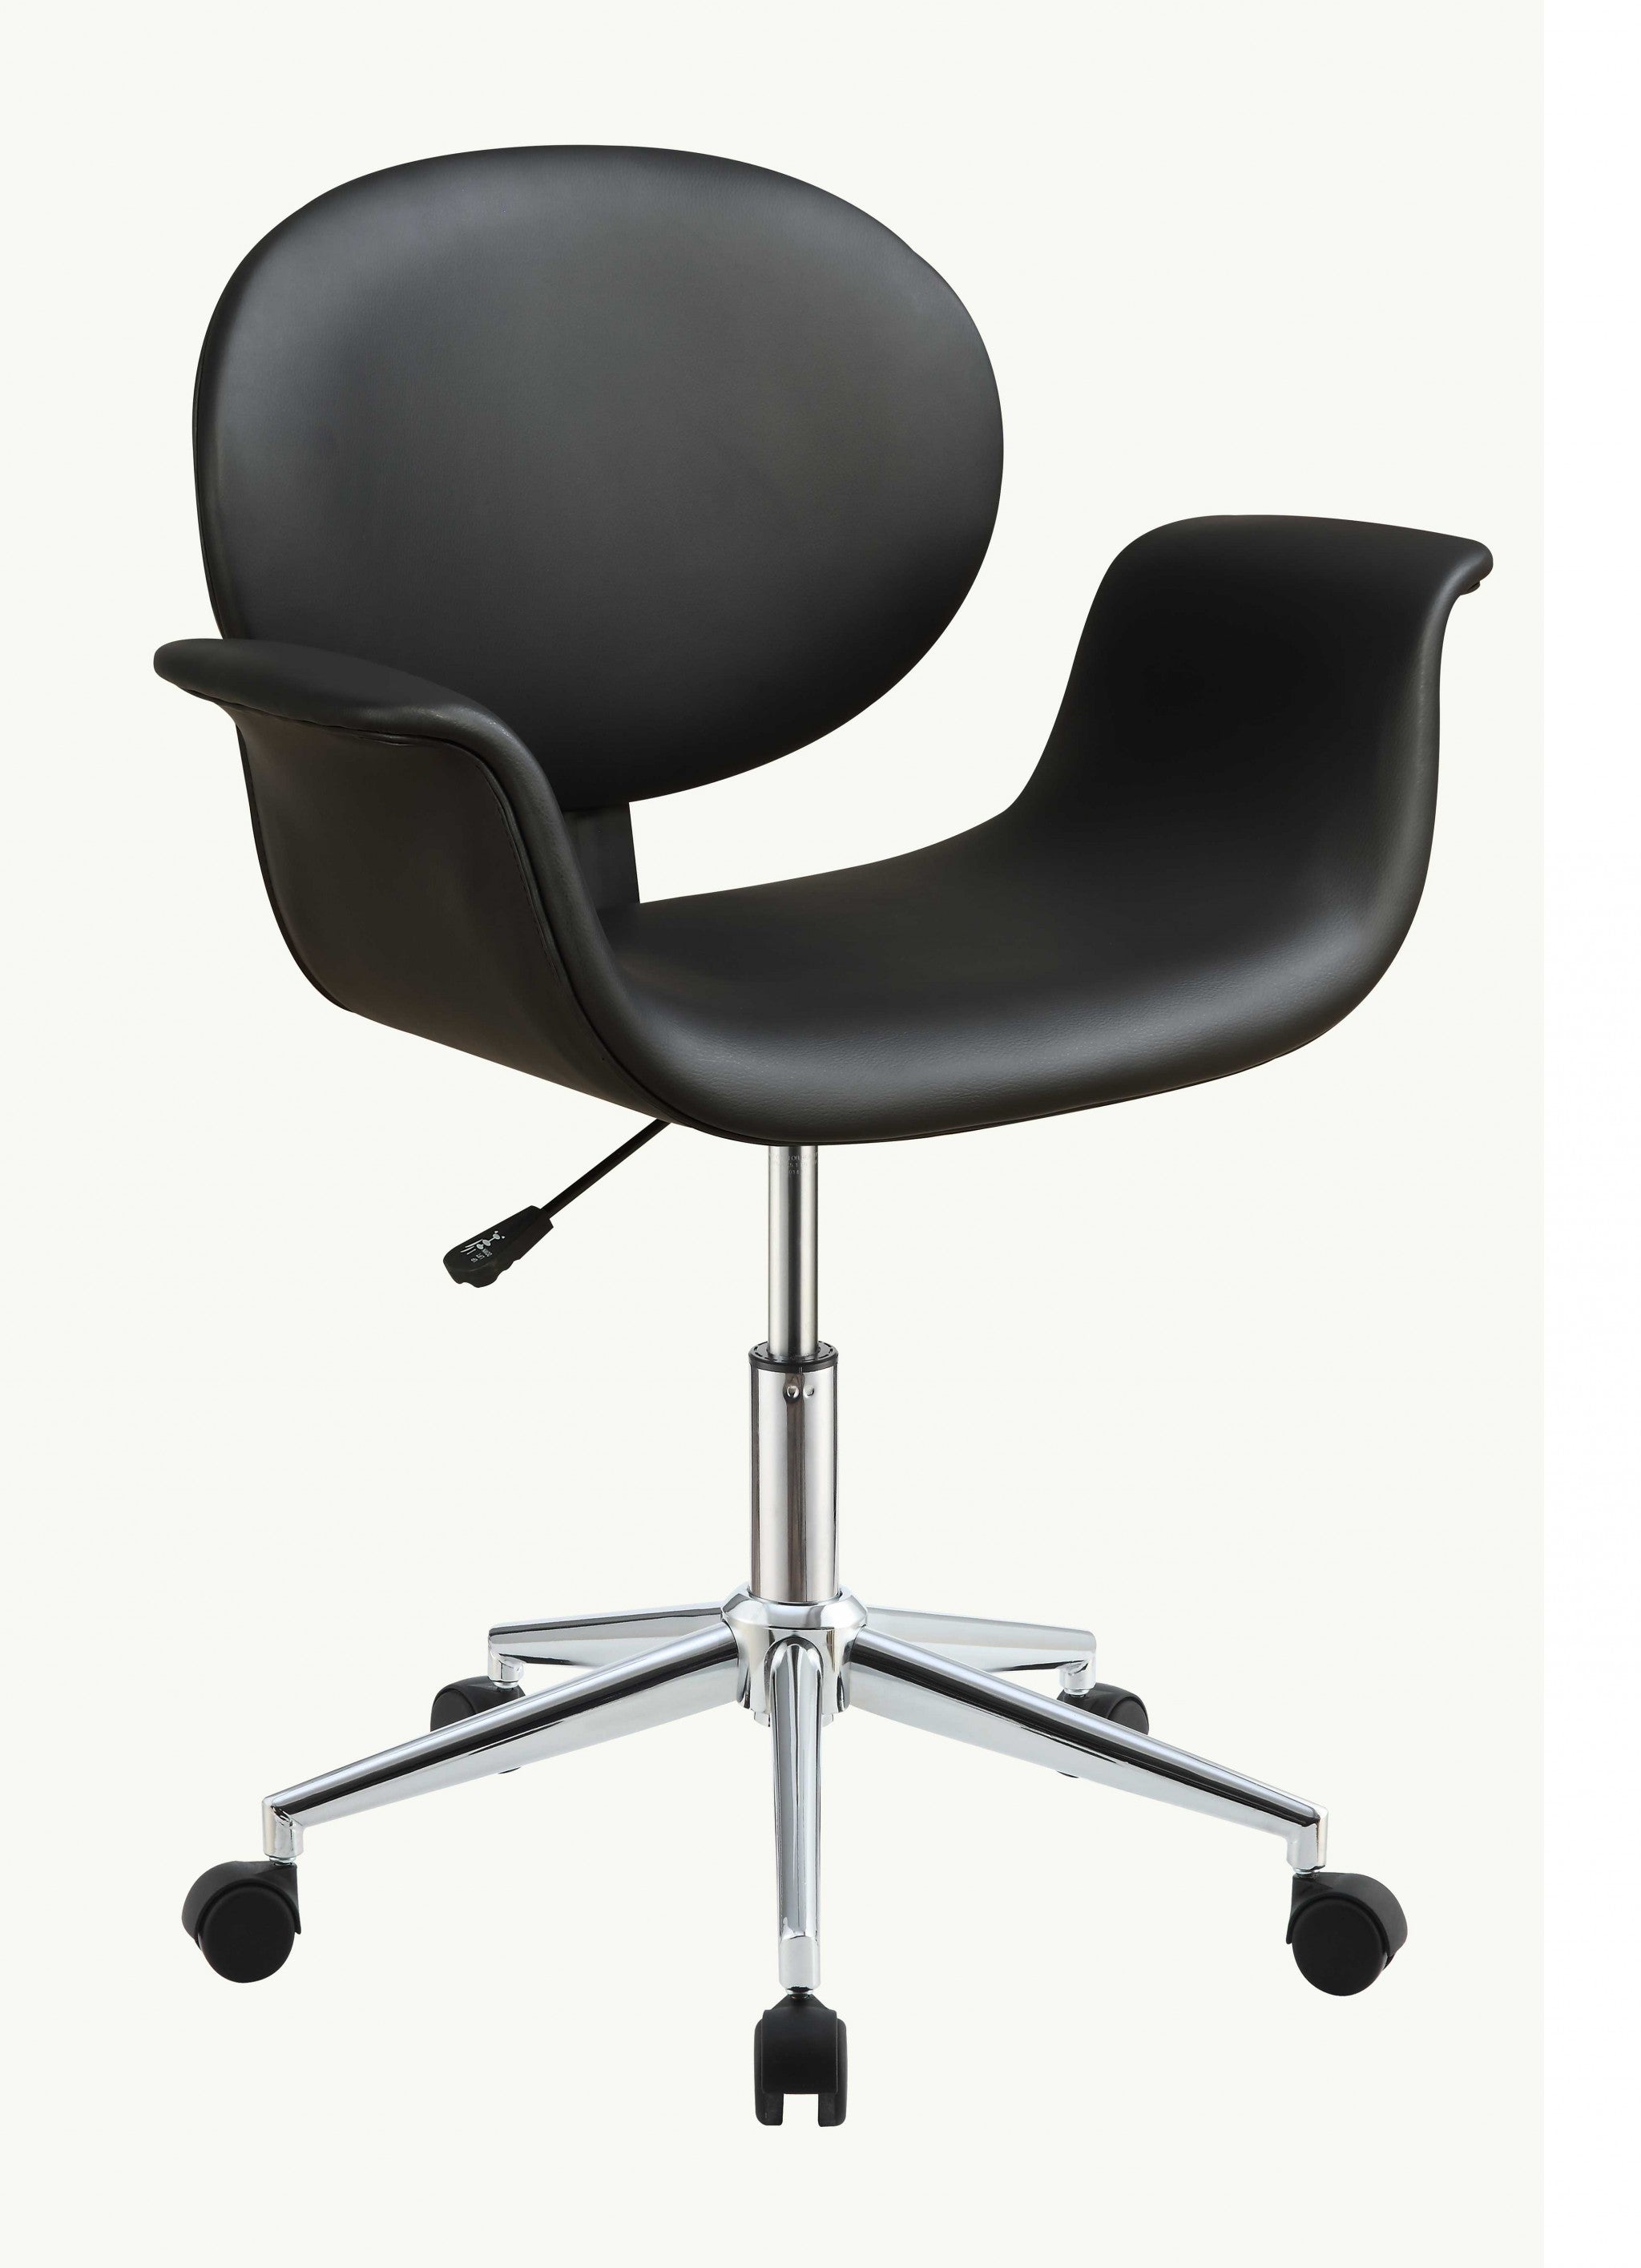 Black Faux Leather Tufted Seat Swivel Adjustable Task Chair Leather Back Steel Frame